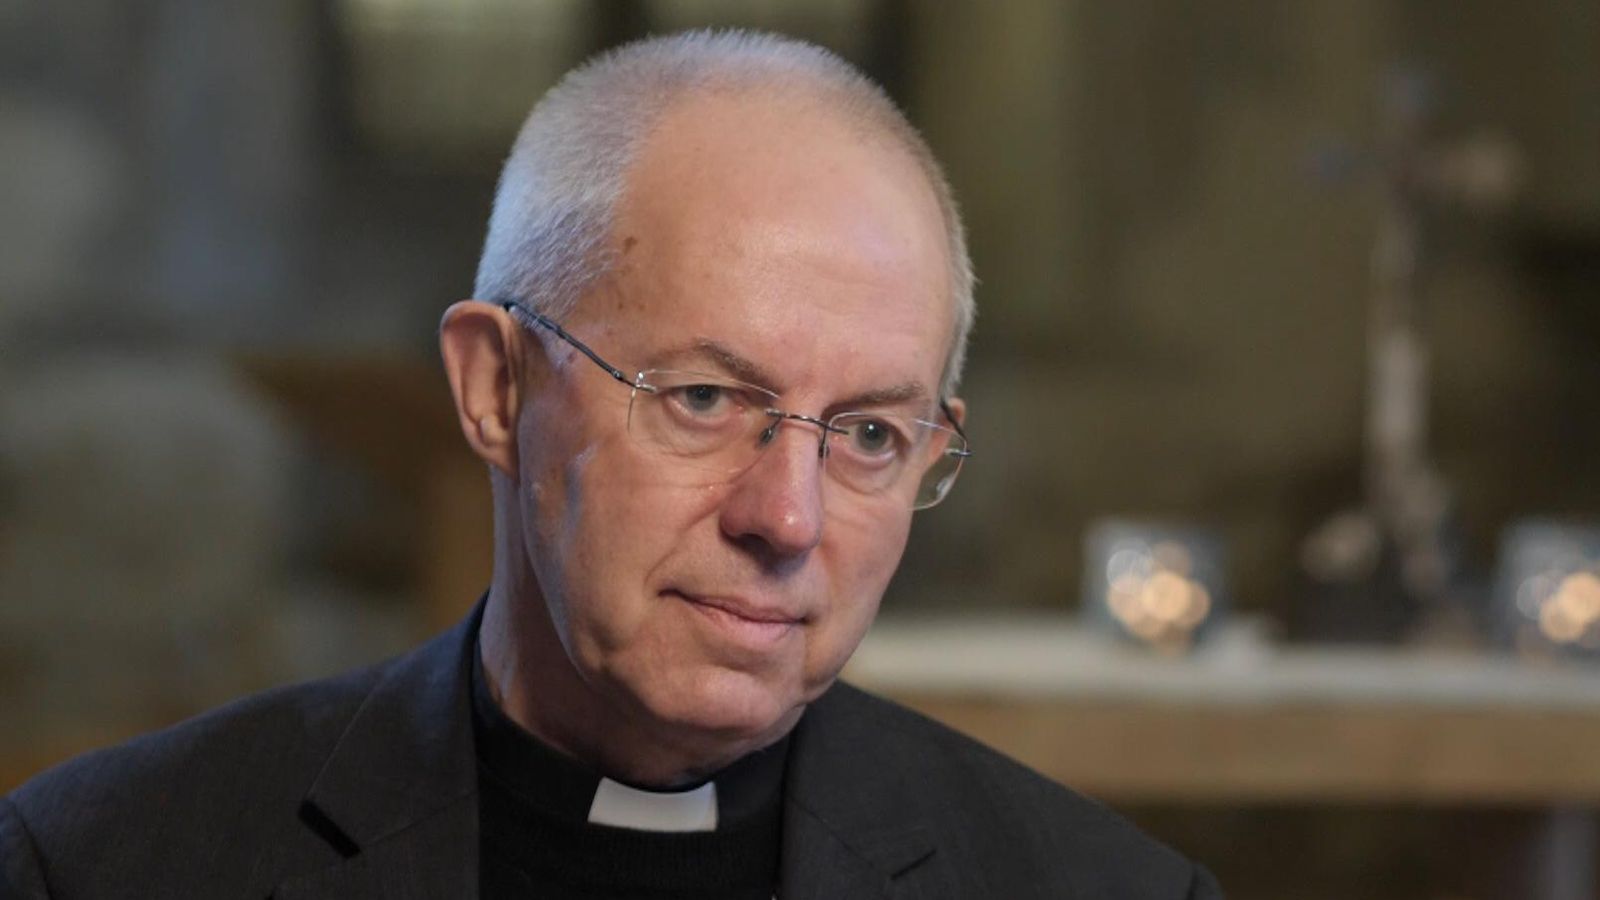 Justin Welby: Archbishop says it is 'disappointing' politicians have failed to resolve social care issue